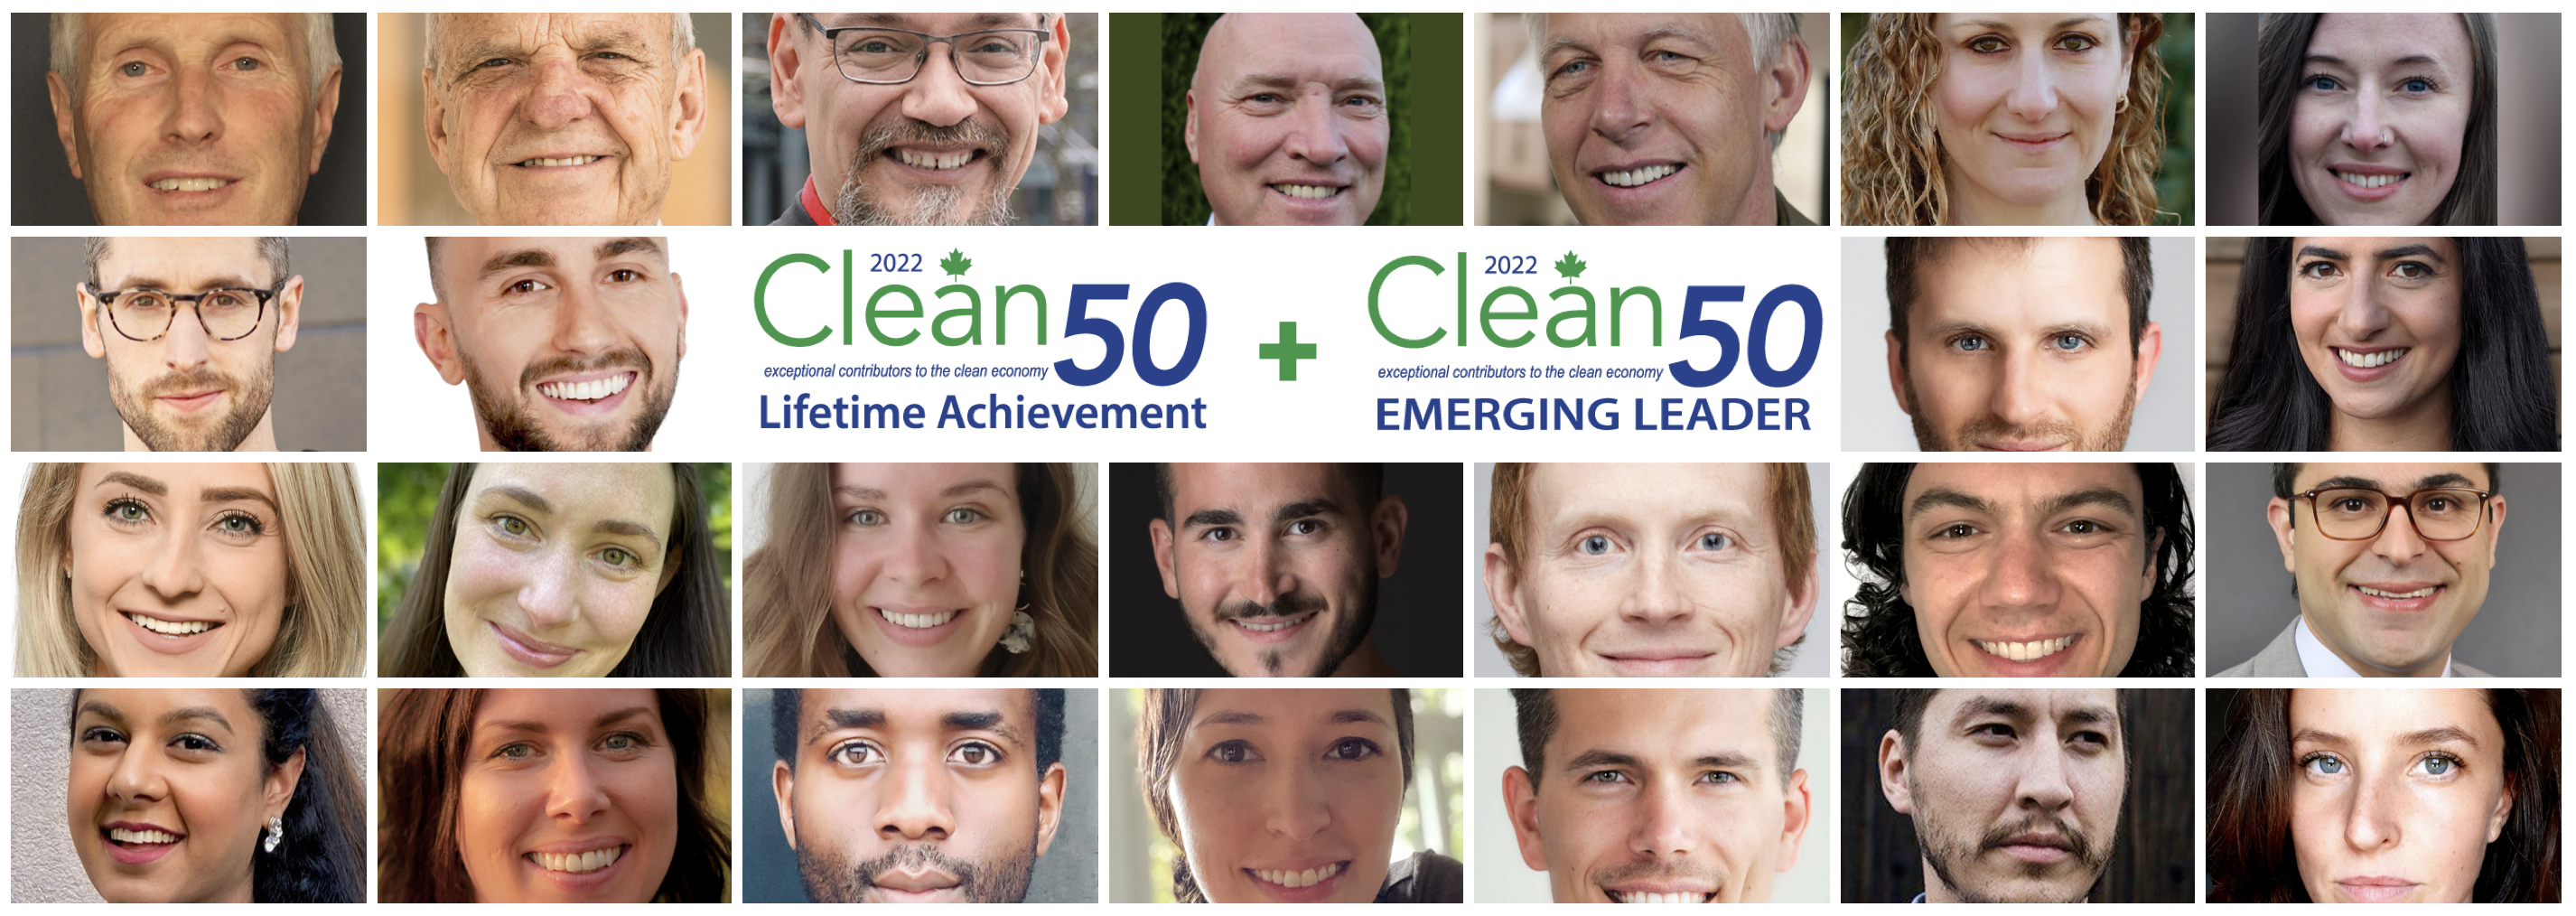 Manitoba firms recognized on this year's Clean50 list – Winnipeg